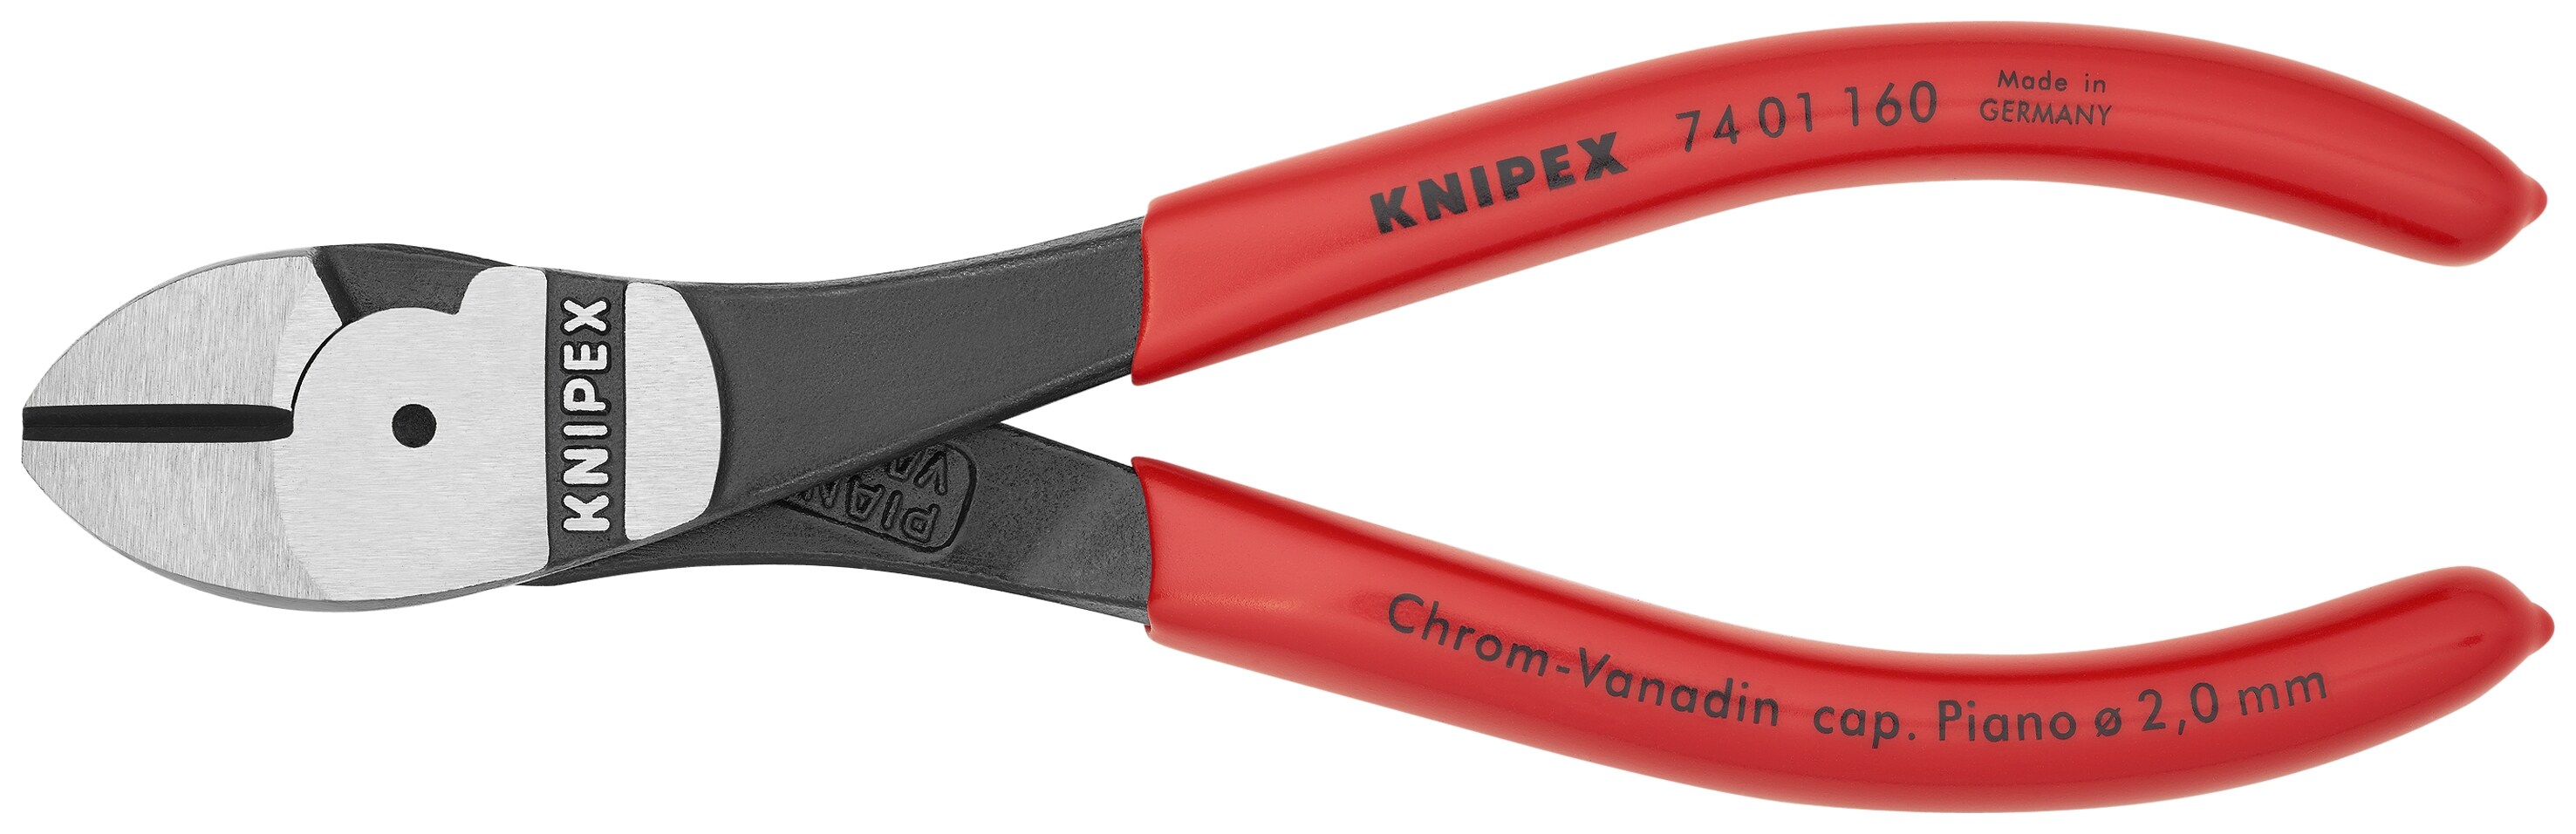 Knipex Cobra Pliers Set 3 Piece 180mm 250mm 300mm Plier in Tray 00 20